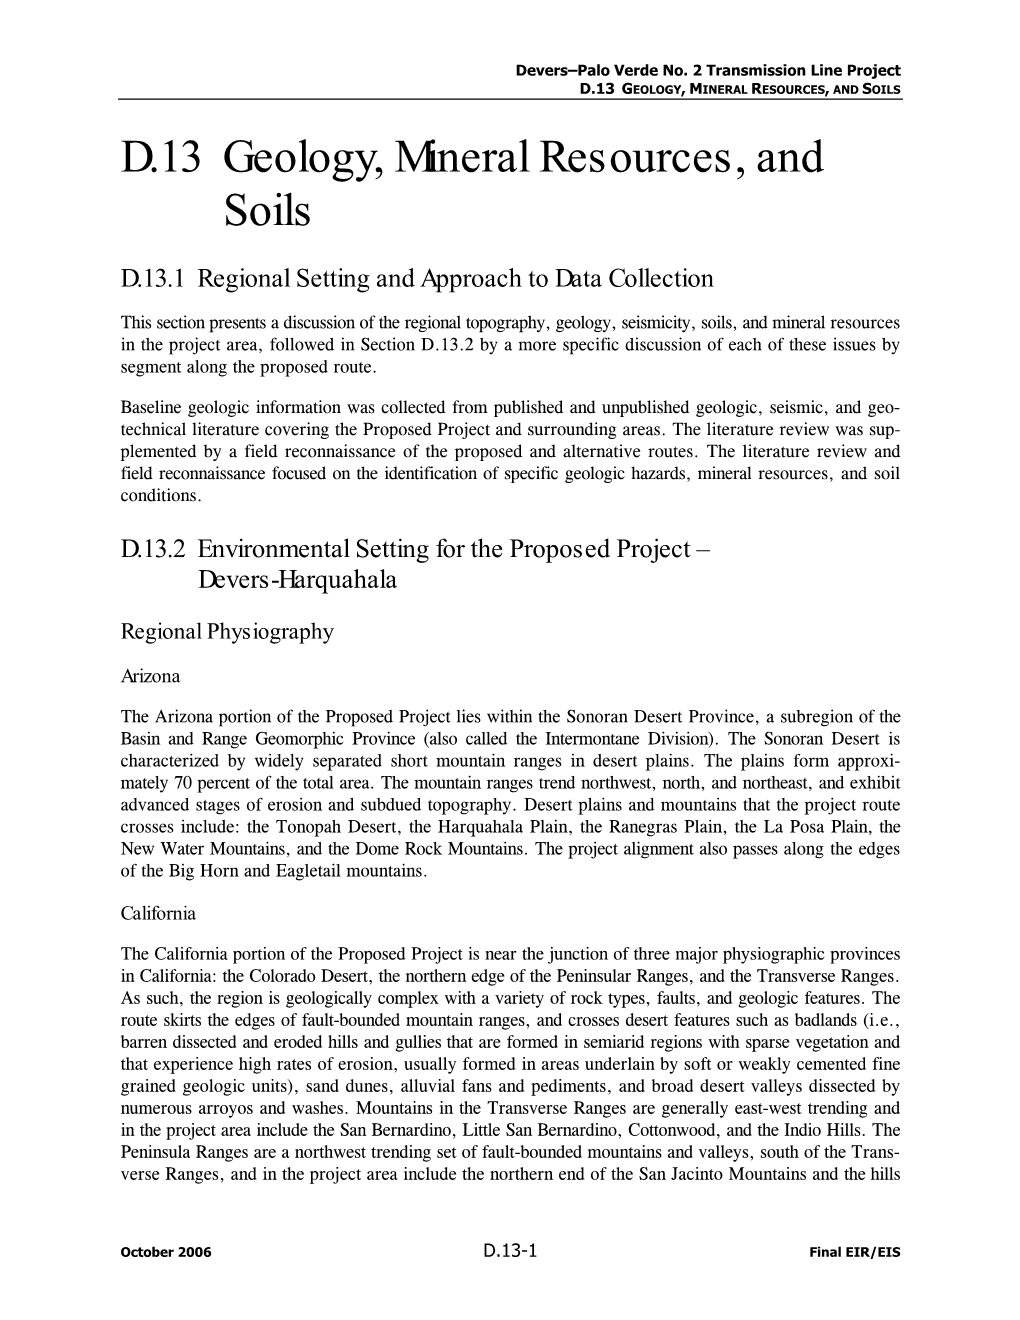 D.13 Geology, Mineral Resources, and Soils